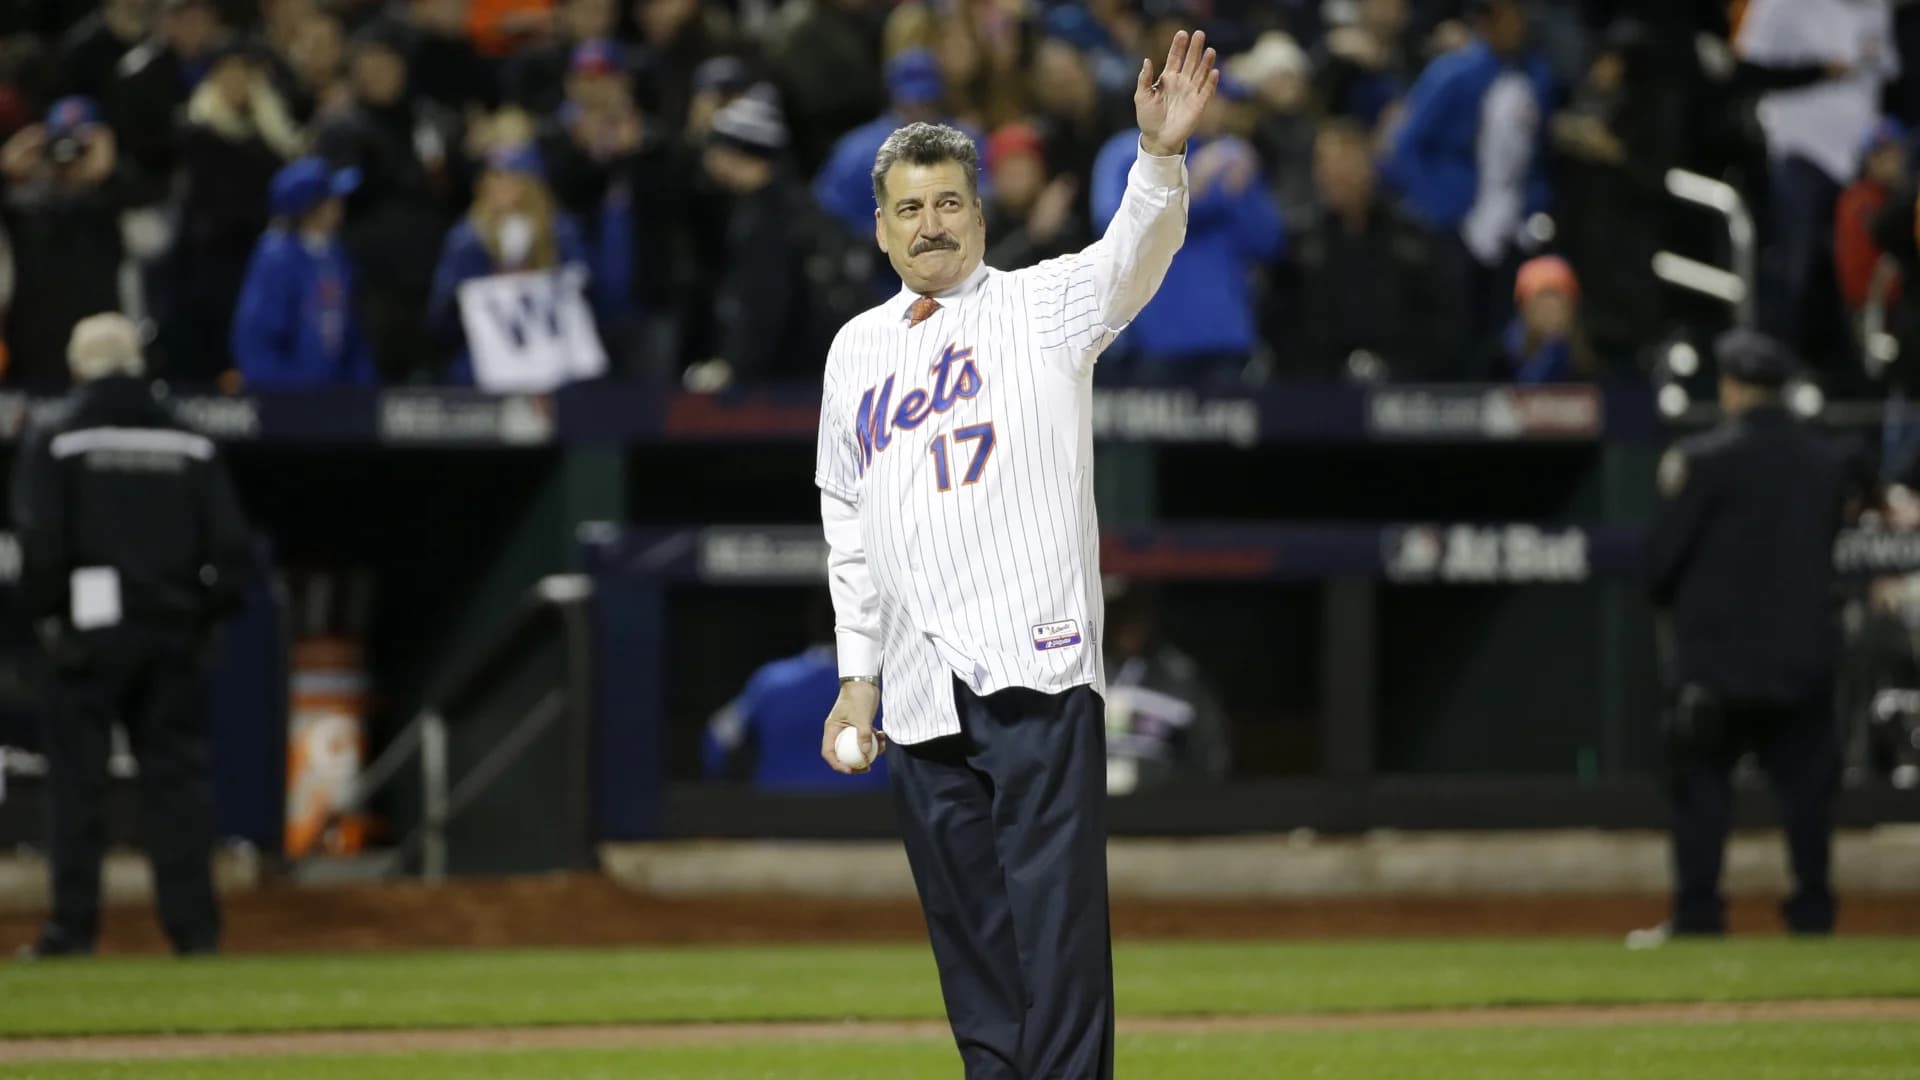 Mets to retire Keith Hernandez’s No. 17 this July